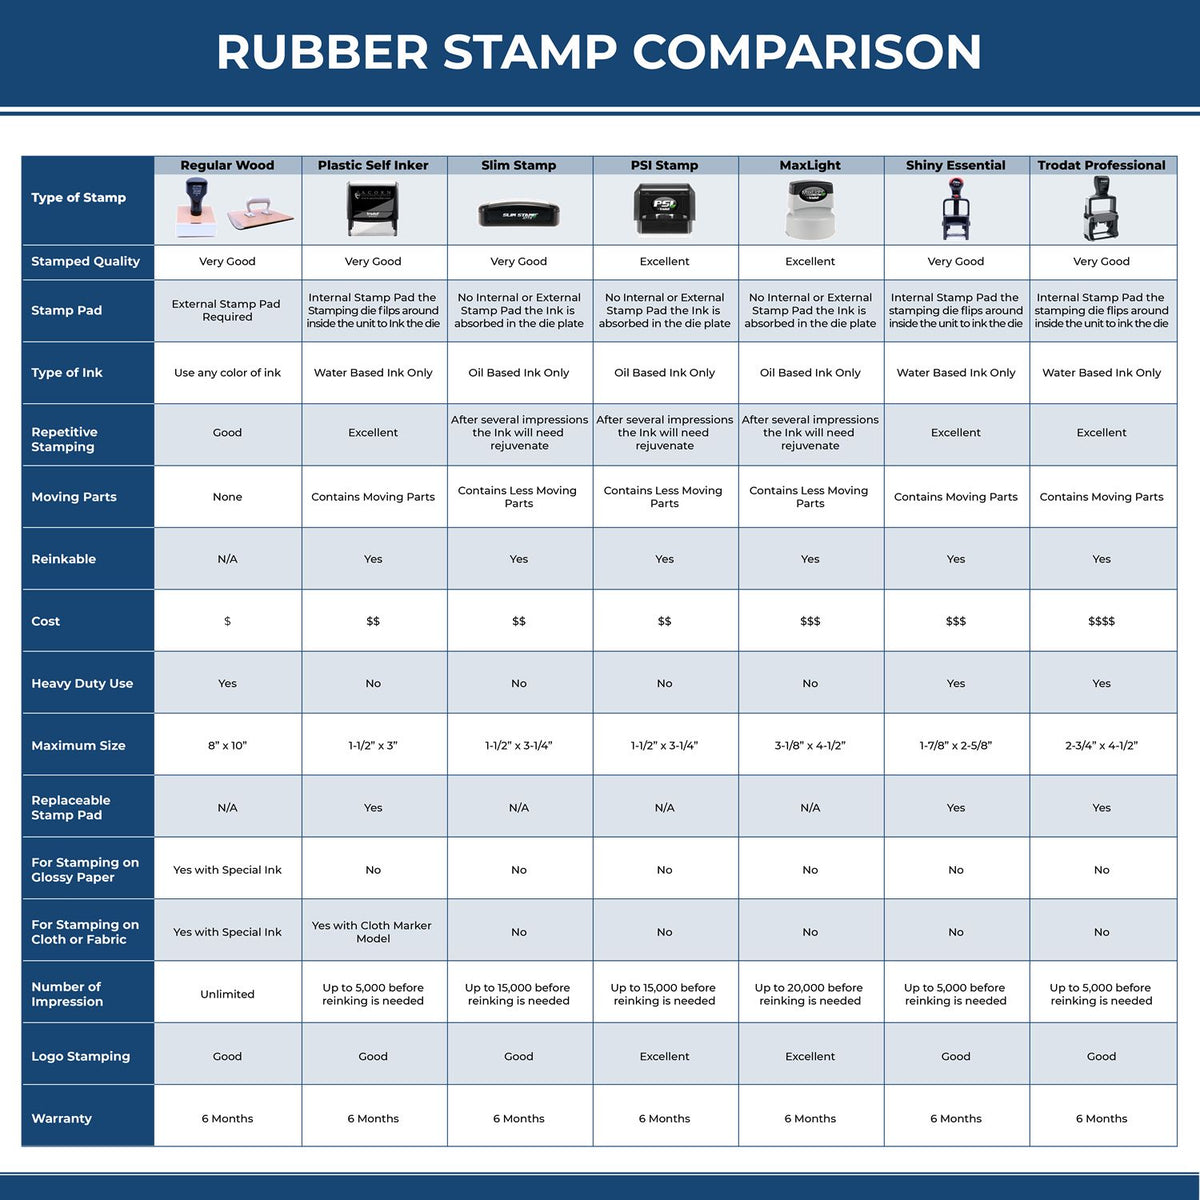 Large Received with In Box Rubber Stamp 4913R Rubber Stamp Comparison